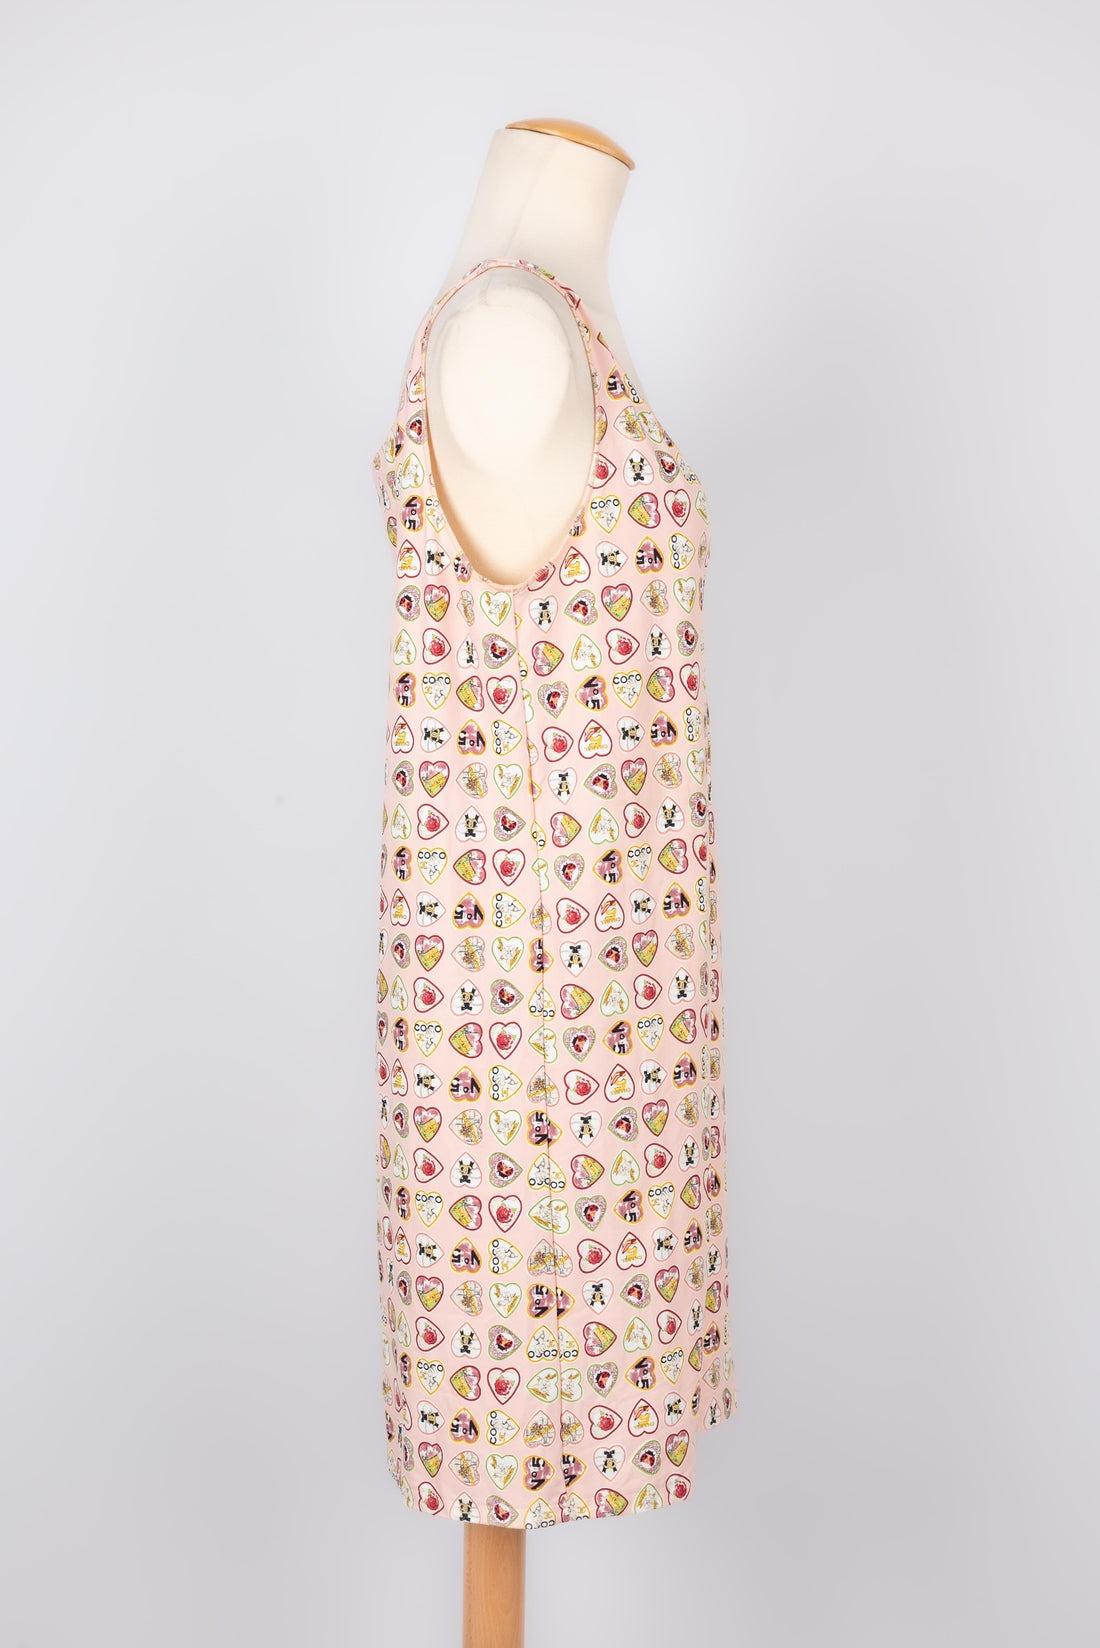 Women's Chanel Dress with Hearts on Pink Background, 2006 For Sale